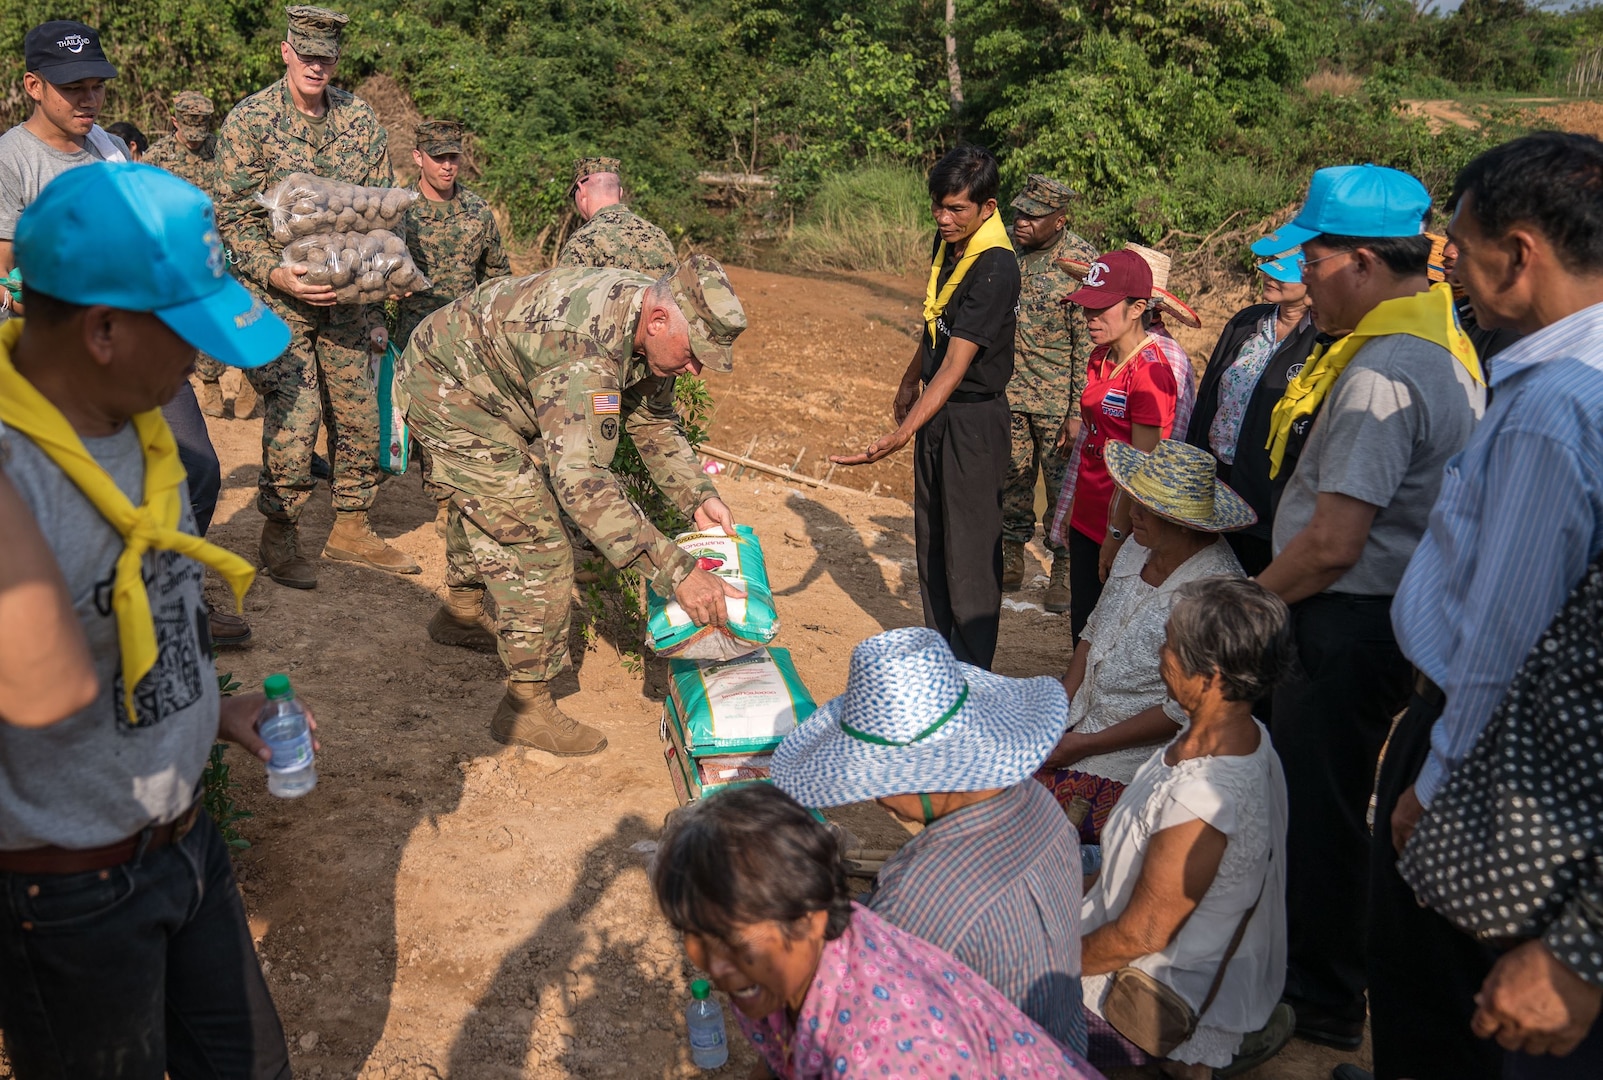 US Army, Marines work with partners to help Thai communities in Cobra Gold exercise